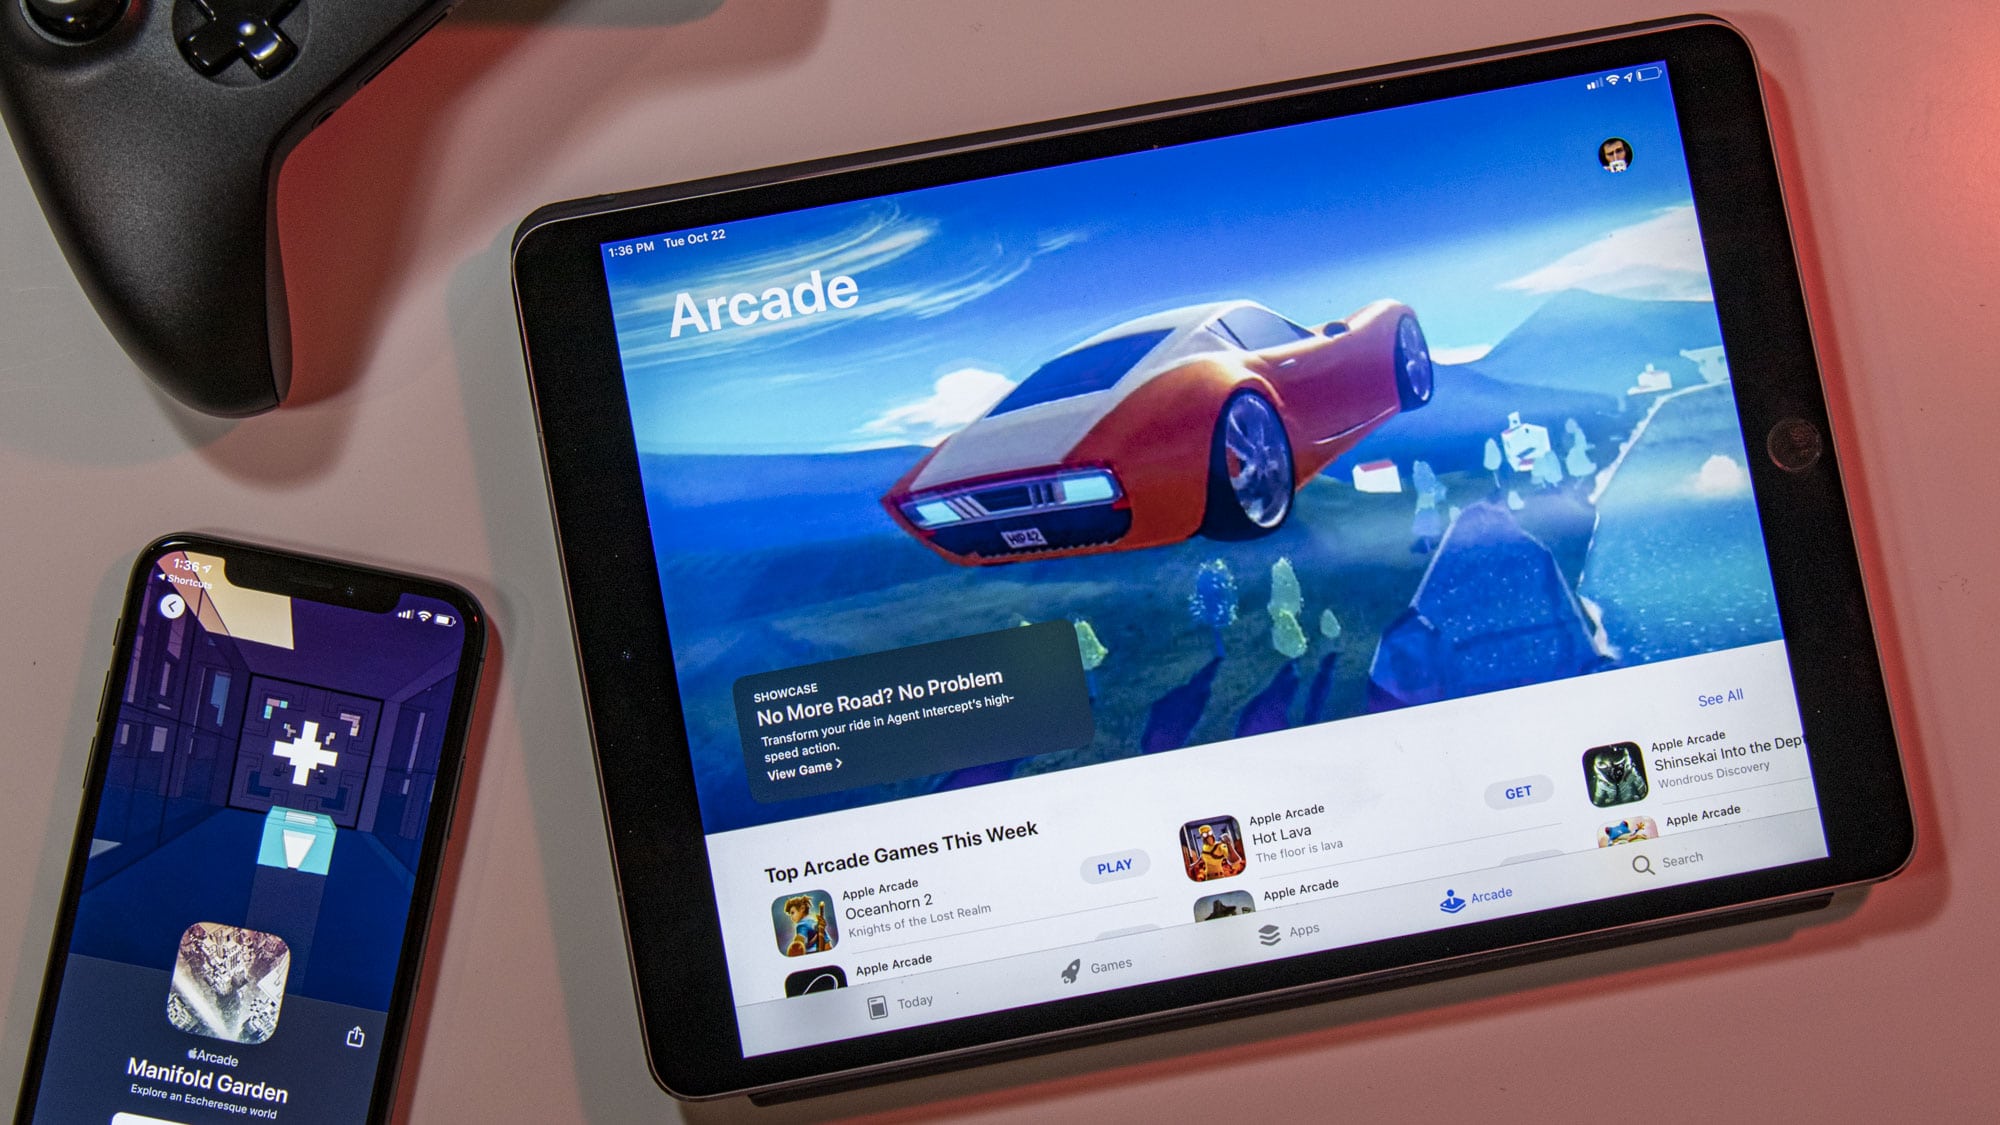 iPad browsing Apple Arcade games catalog with iPhone and Xbox Controller